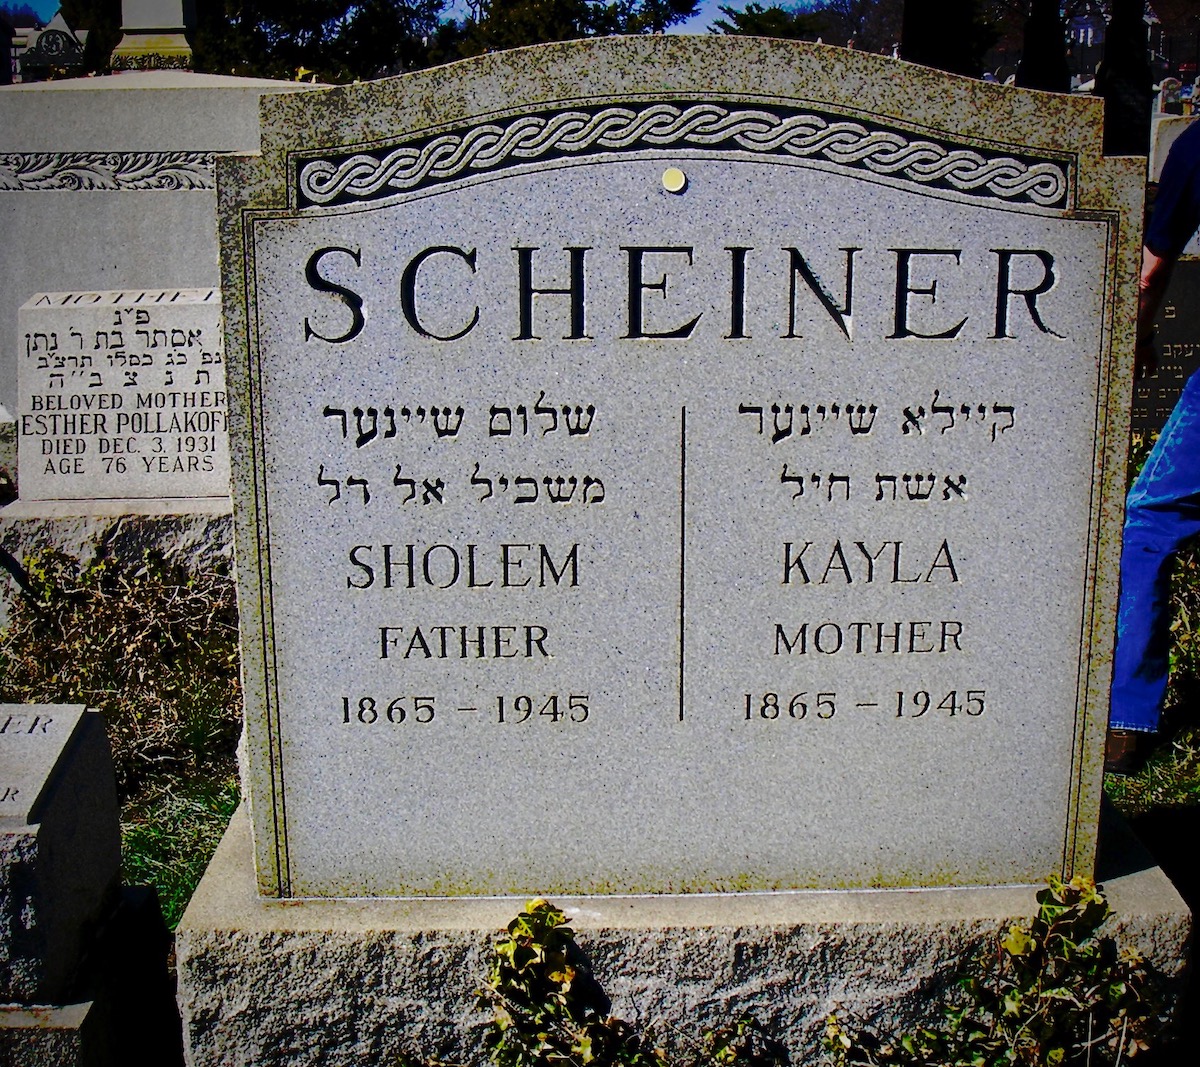 Sholem & Kayla Scheiner, Headstone, Acacia Cemetery, Queens, NY (5)